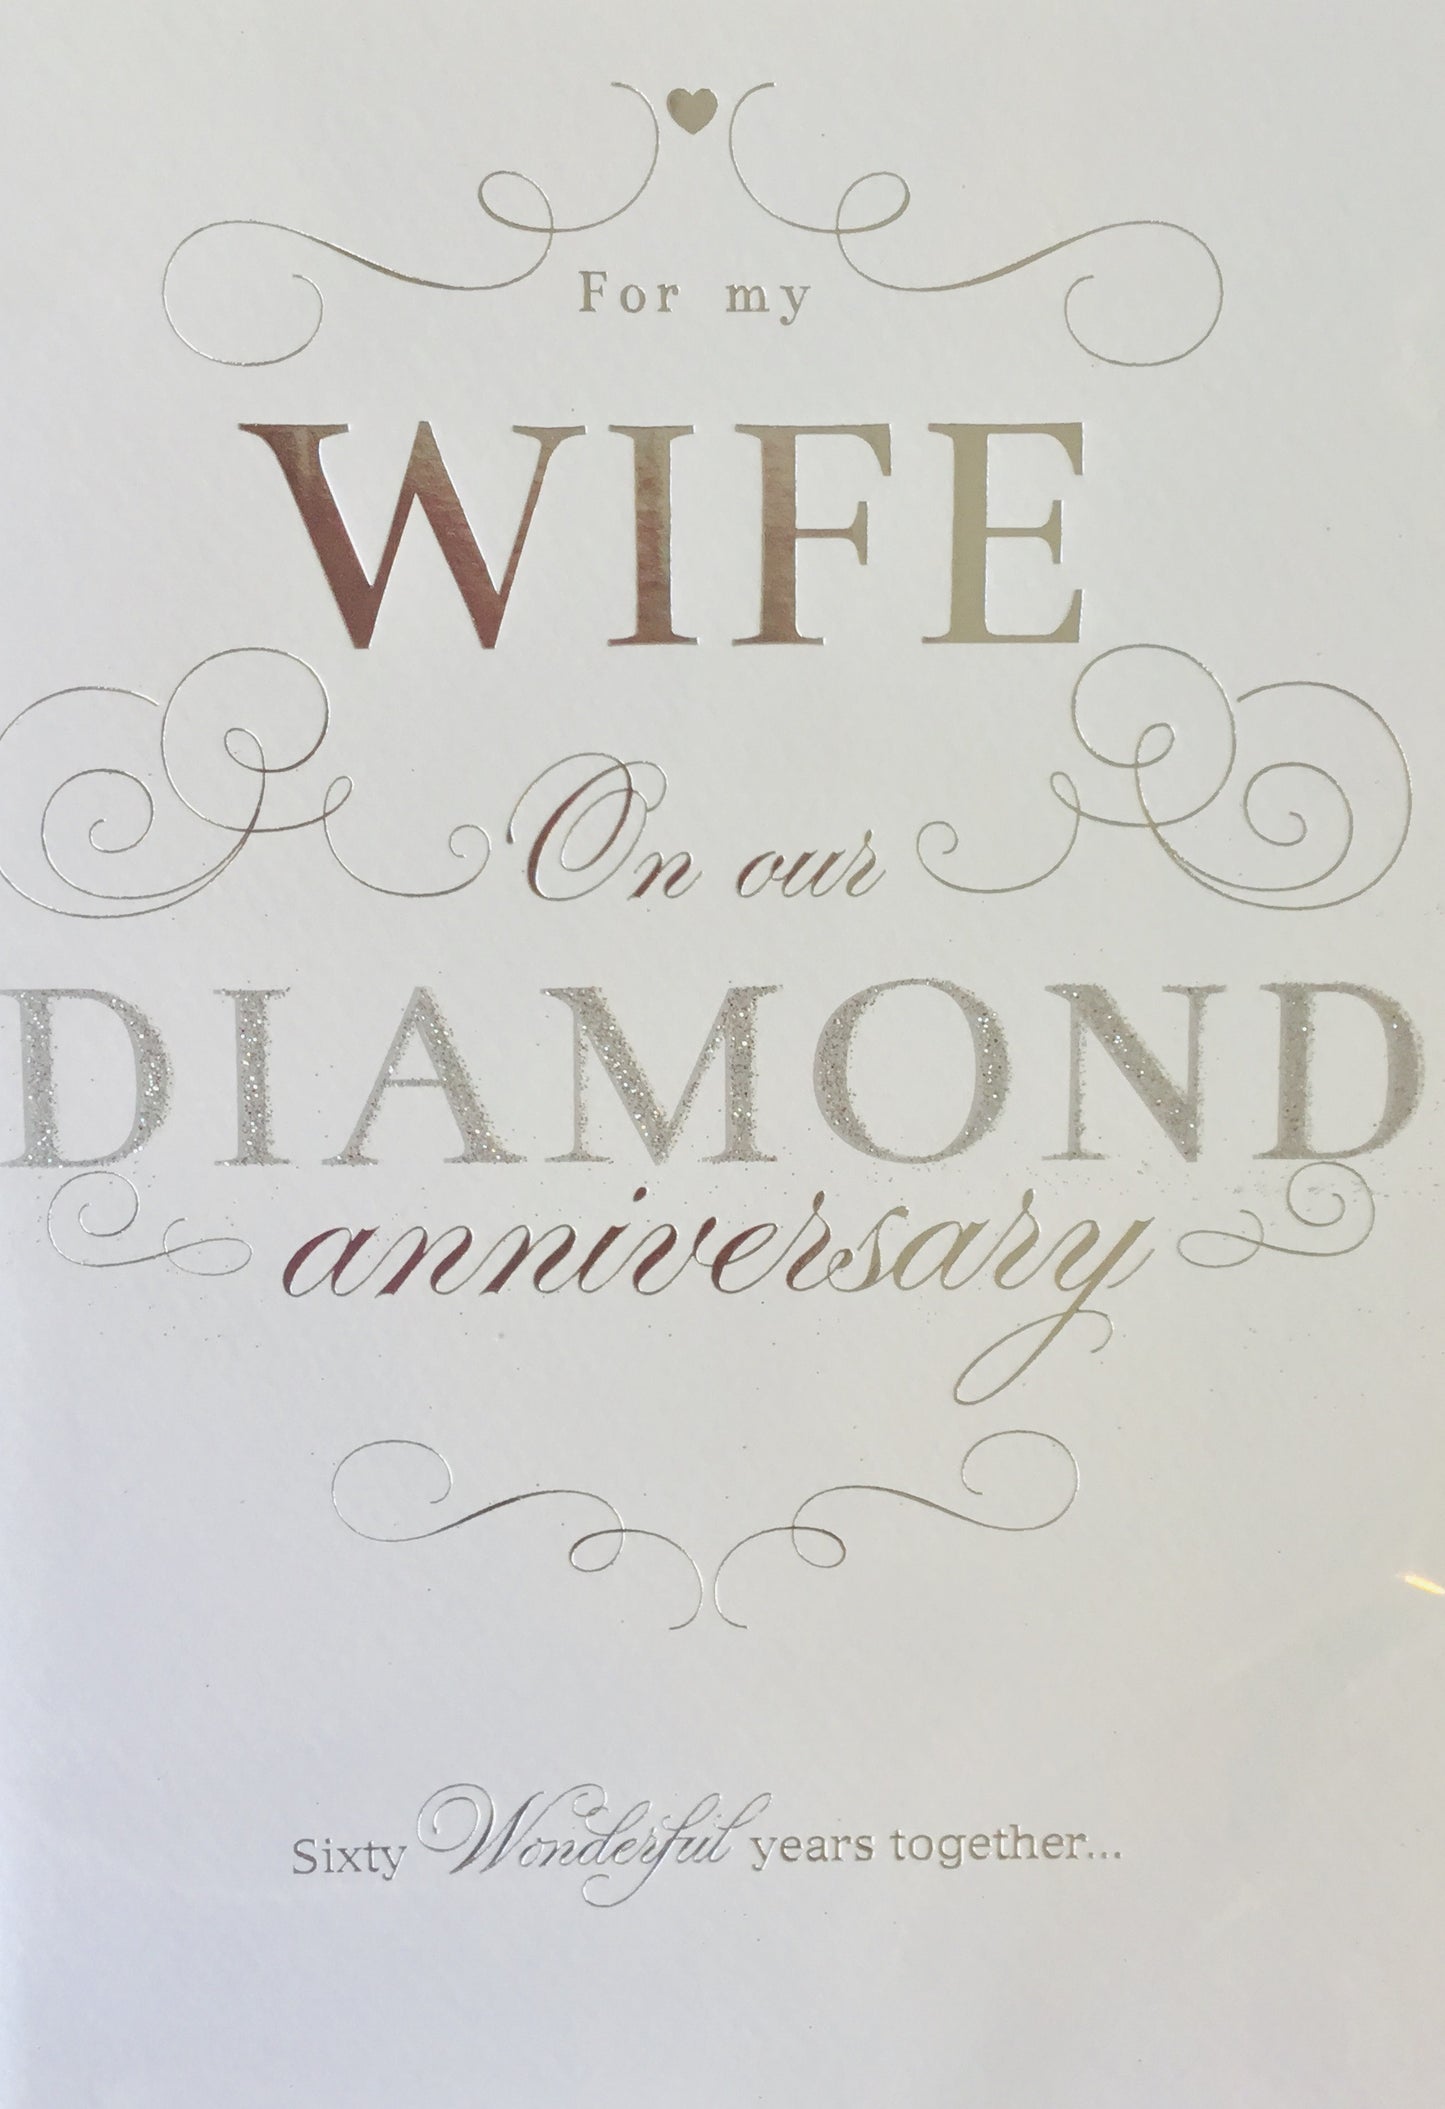 60th For My Wife on our Diamond Anniversary